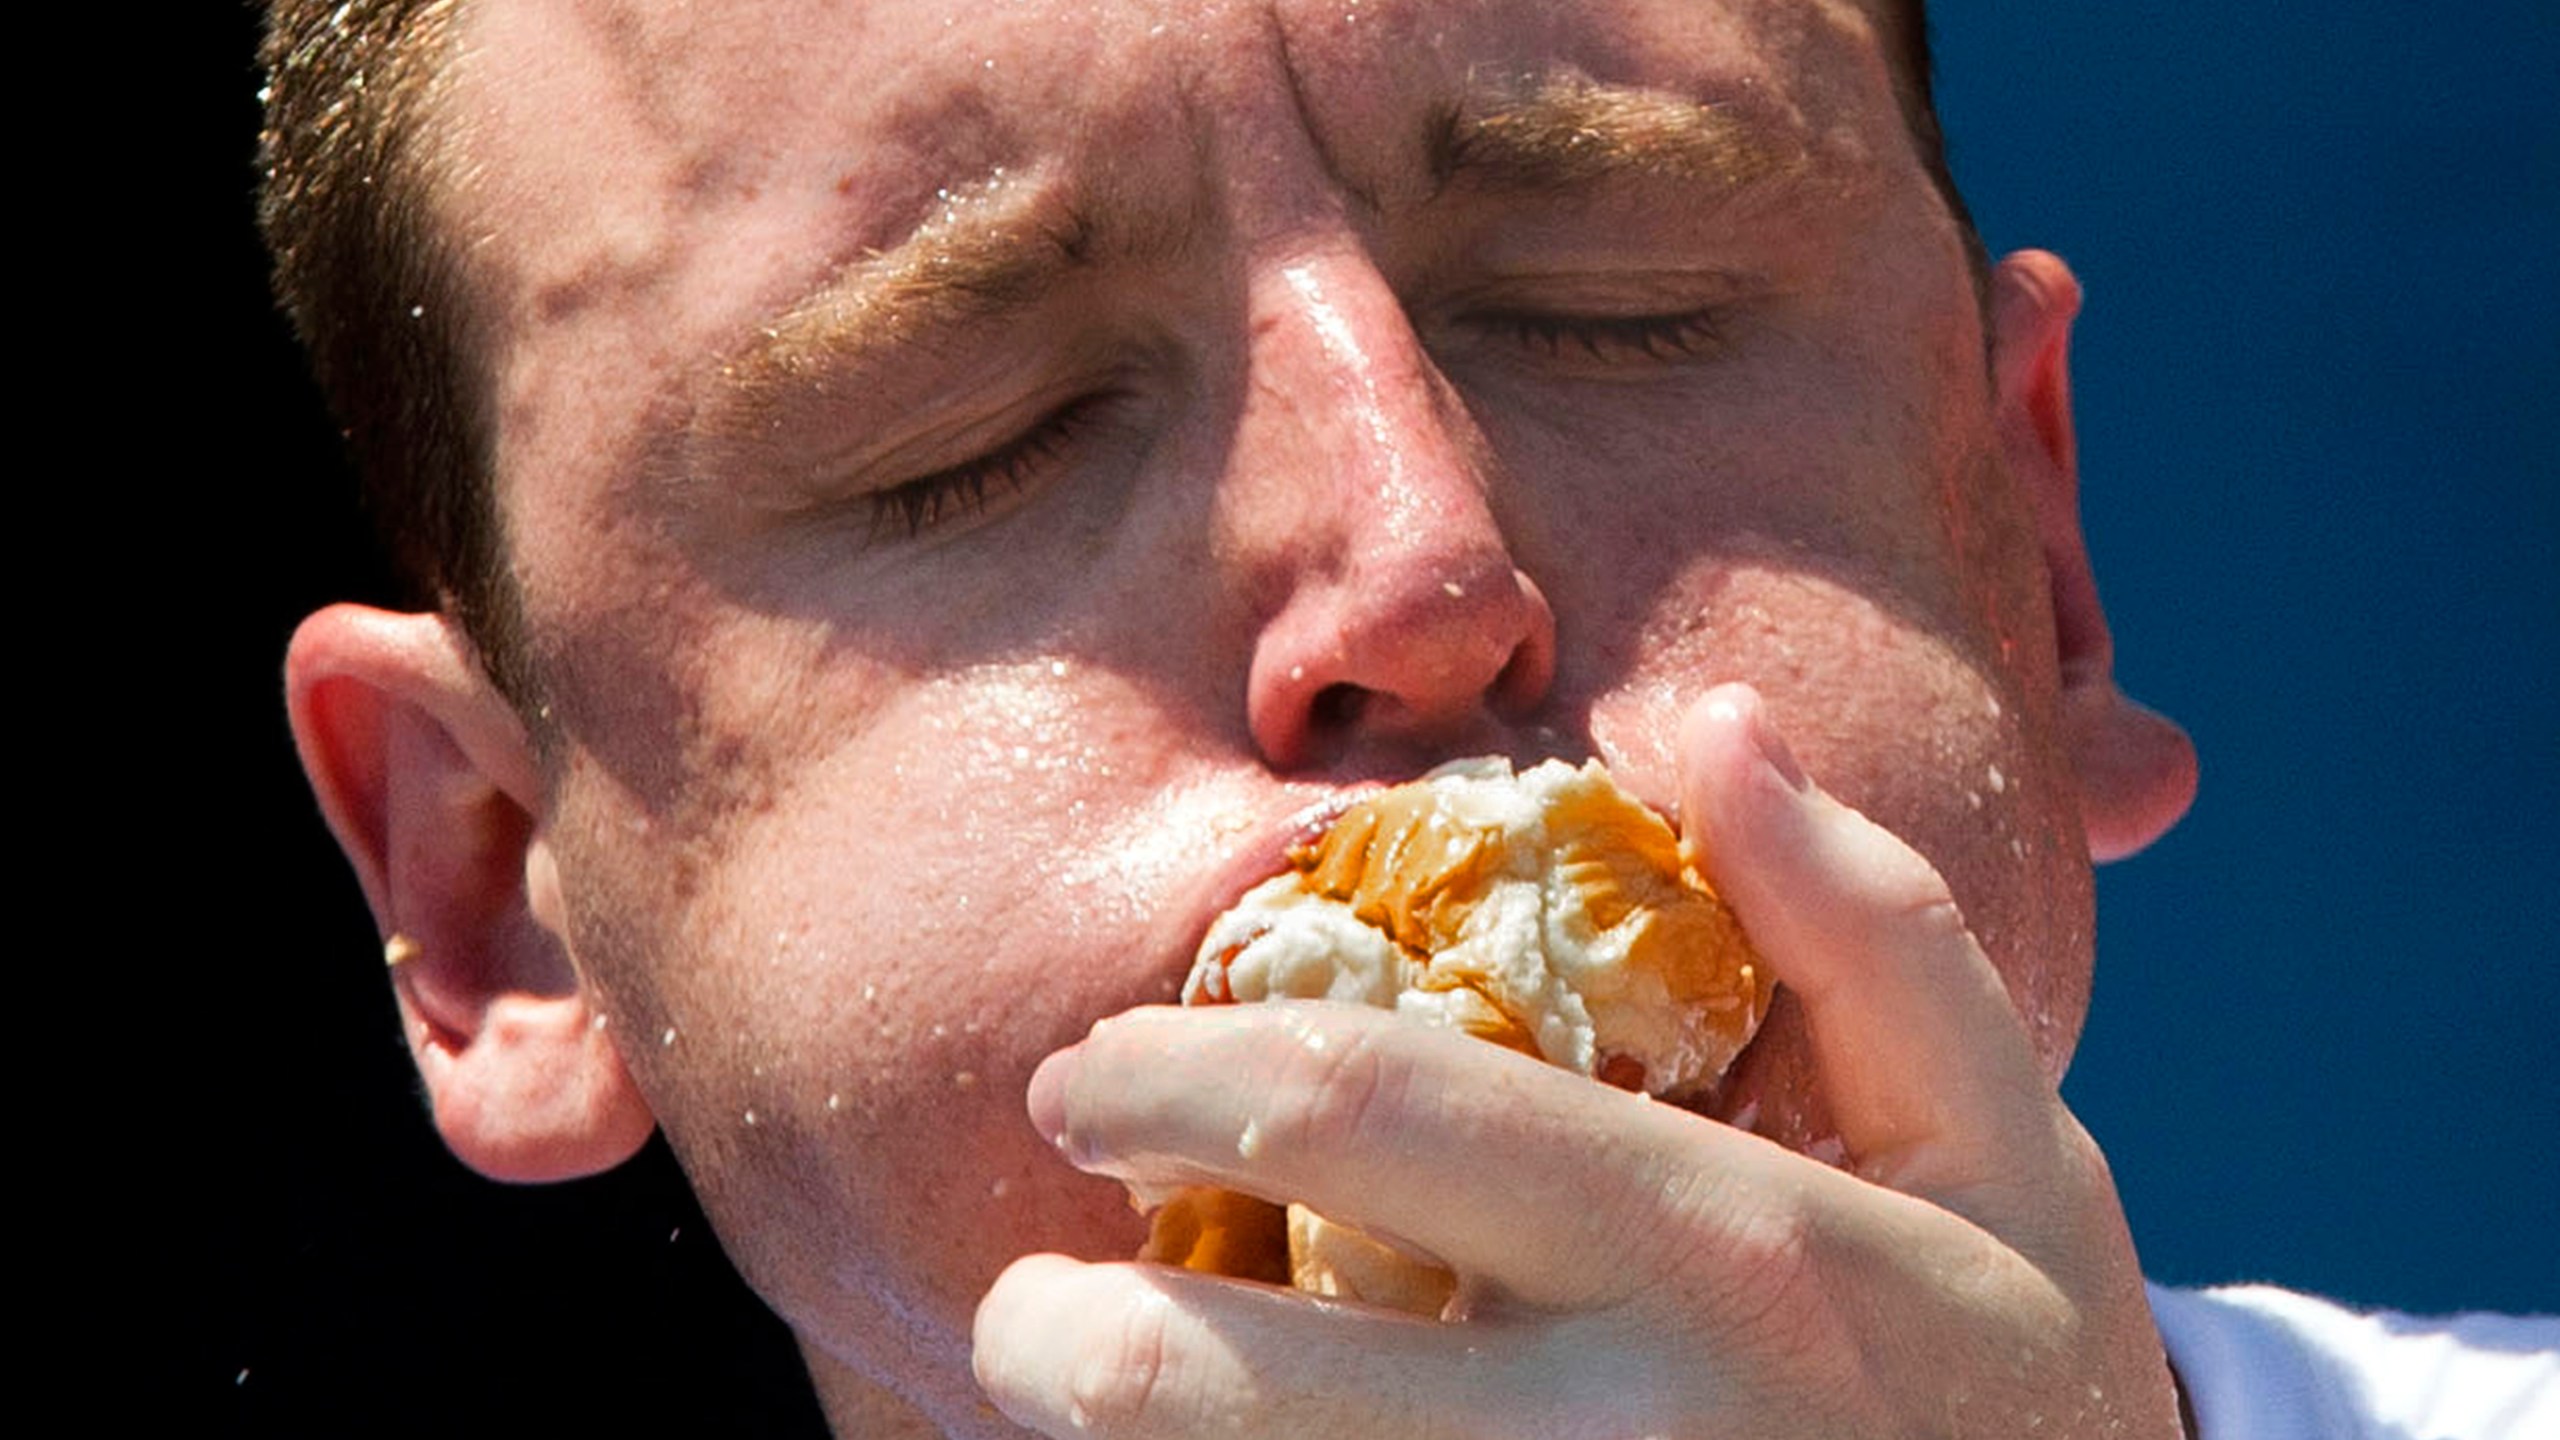 FILE - Five-time reigning champion Joey Chestnut competes in the Nathan's Famous Hot Dog Eating World Championship, July 4, 2012, at Coney Island, in the Brooklyn borough of New York. Chestnut will take his hot dog-downing talents to an army base in Texas for America's Independence Day this year, after a falling out with organizers of the annual New York City-based event. (AP Photo/John Minchillo, File)